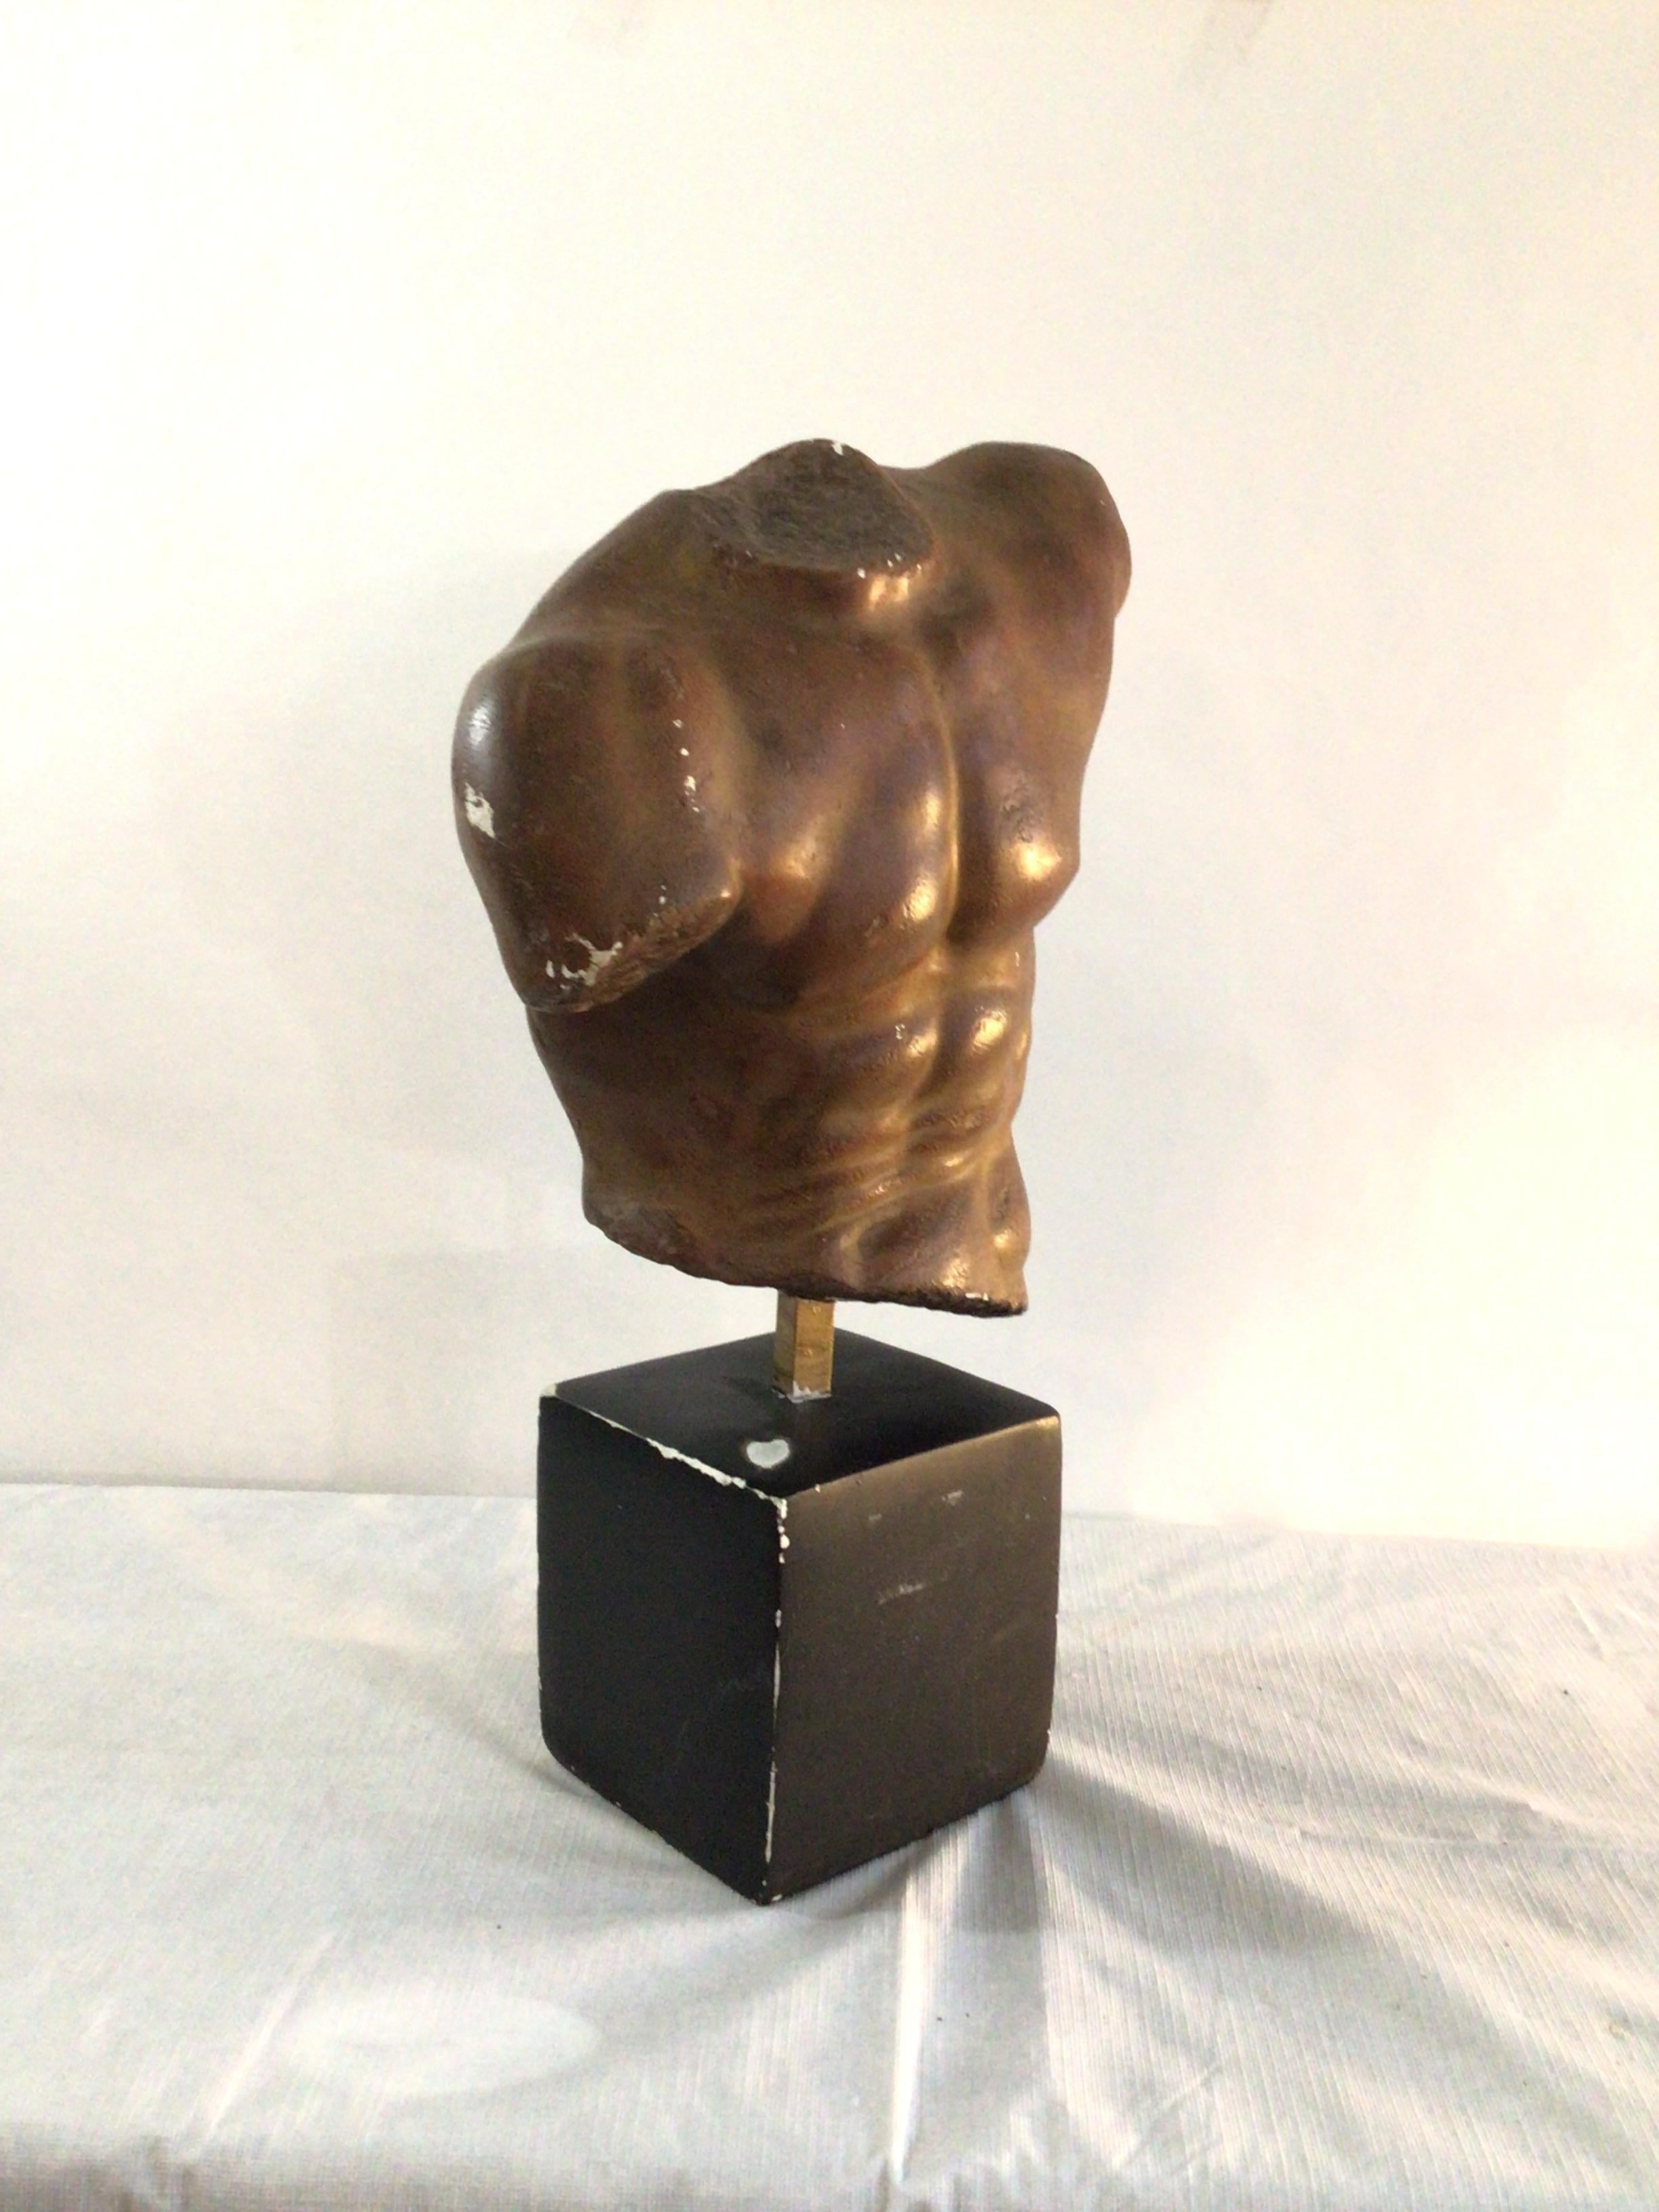 1990s Painted Plaster Male Torso On A Painted Plaster Base 
In the style of Alva Studios 